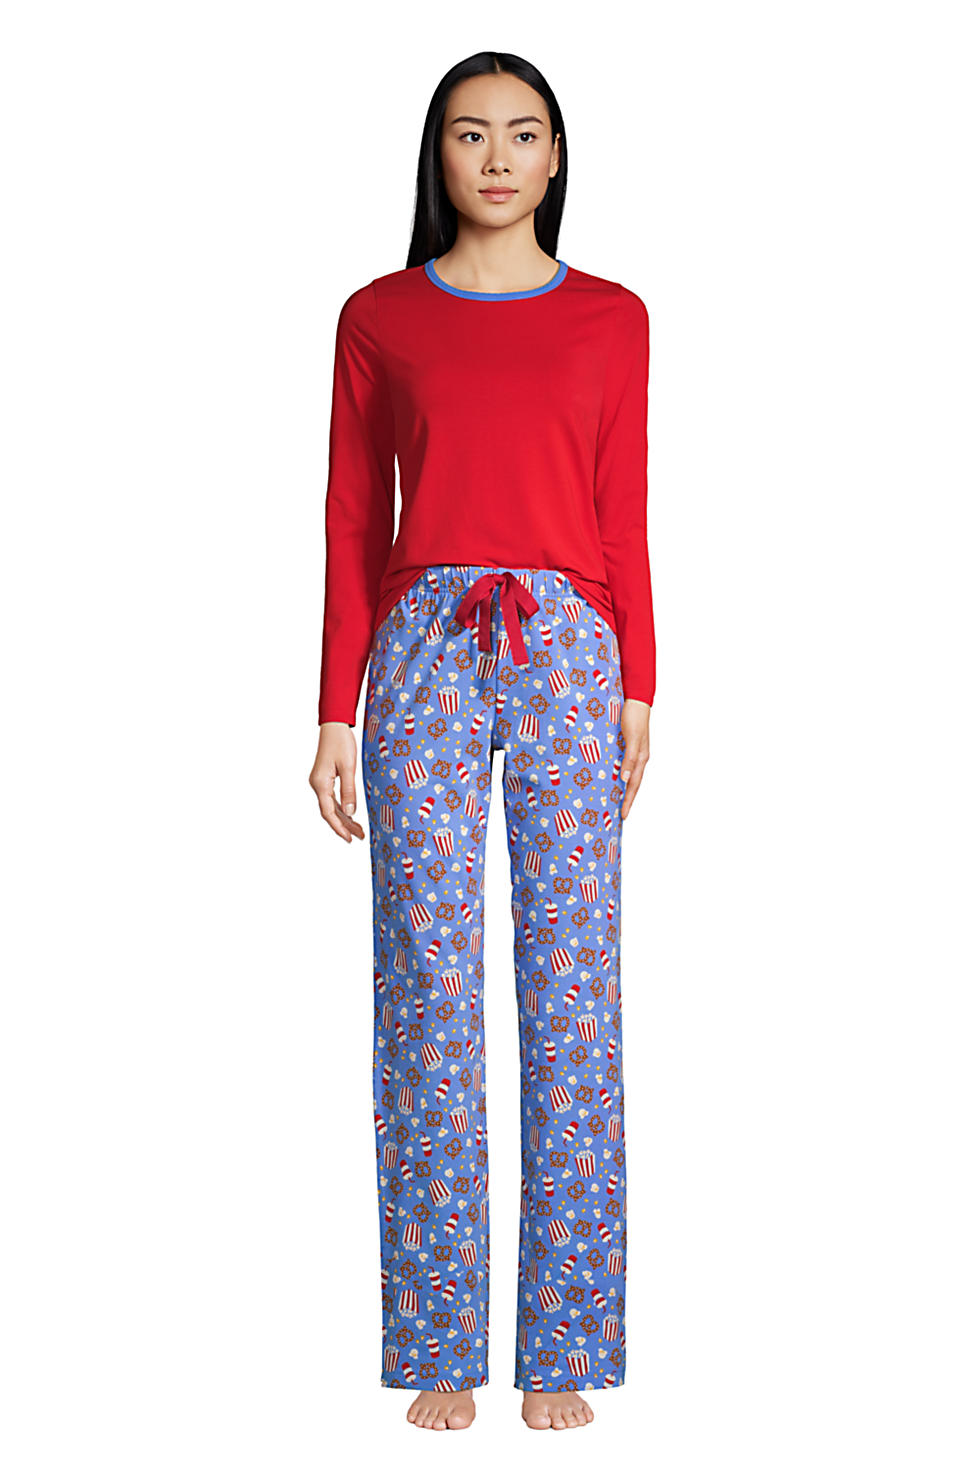 Lands End Women's Knit Pajama Set Long Sleeve T-Shirt and Pants (Chicory Blue Movie Night)